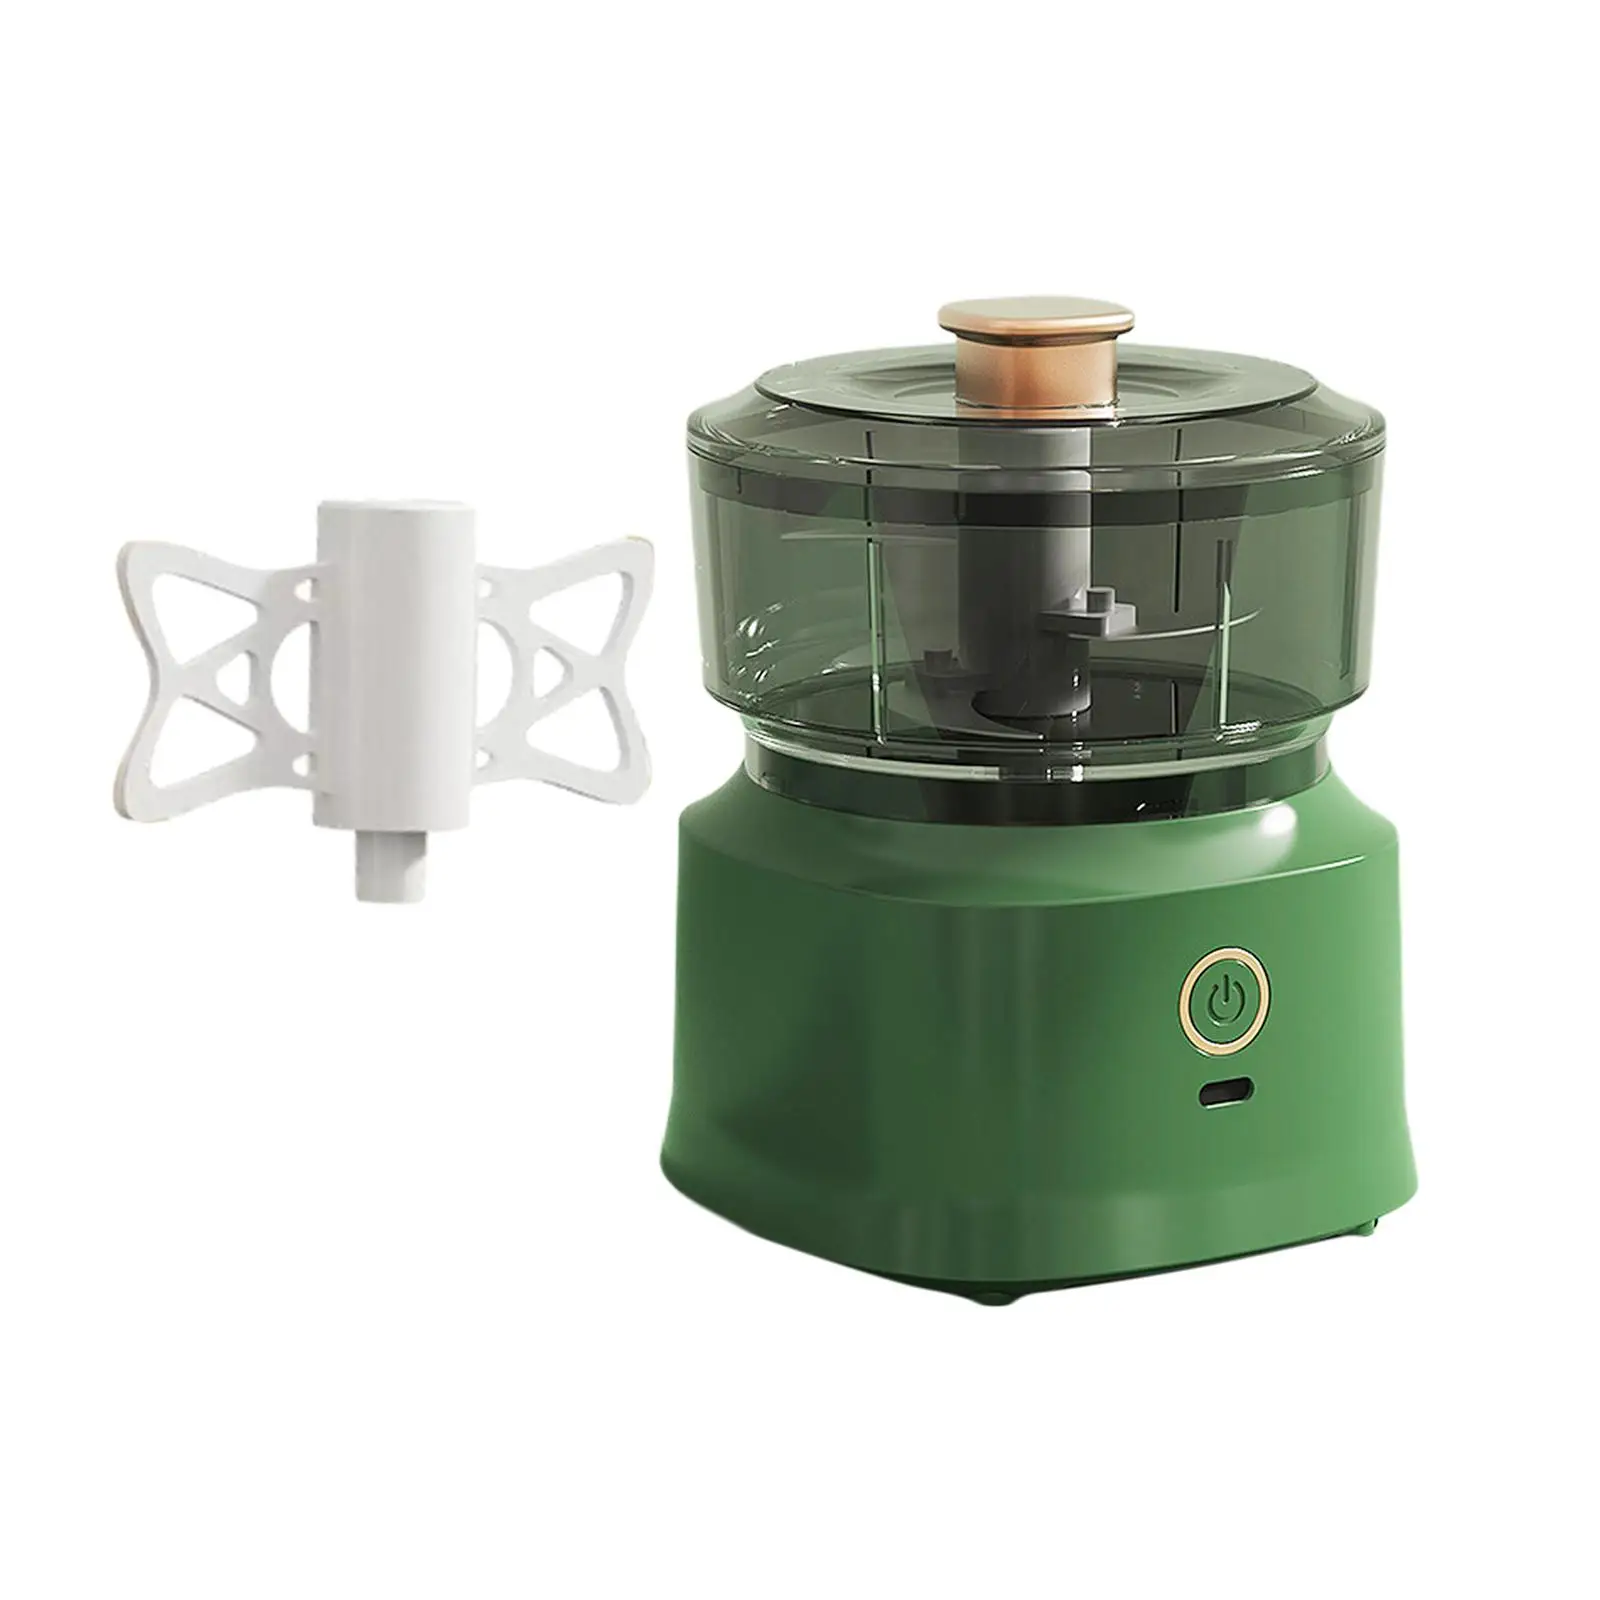 Electric Garlic Chopper 350ml Kitchen Gadget Portable Strong Power Multifunctional Food Processor for Onion Meat Spice Lettuce